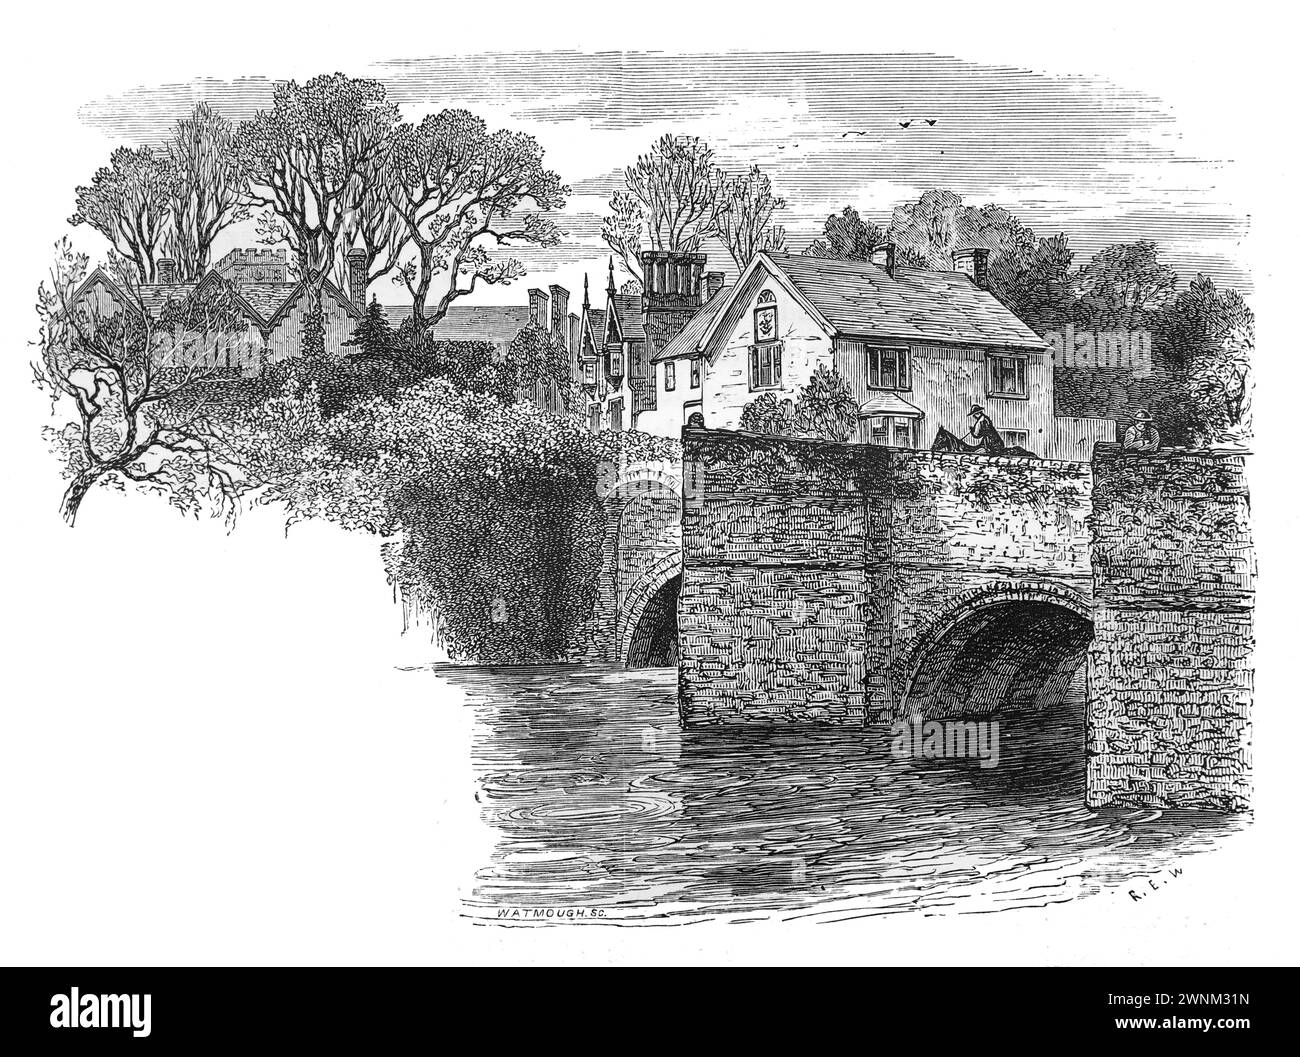 Ludford Bridge, Ludlow in the 19th century; Black and white illustration from 'Our Own Country' a Descriptive, Historical and Pictorial guide to the UK published in late 1880s by Cassell, Petter, Galpin & Co. Historic pictures of Briatin. Stock Photo